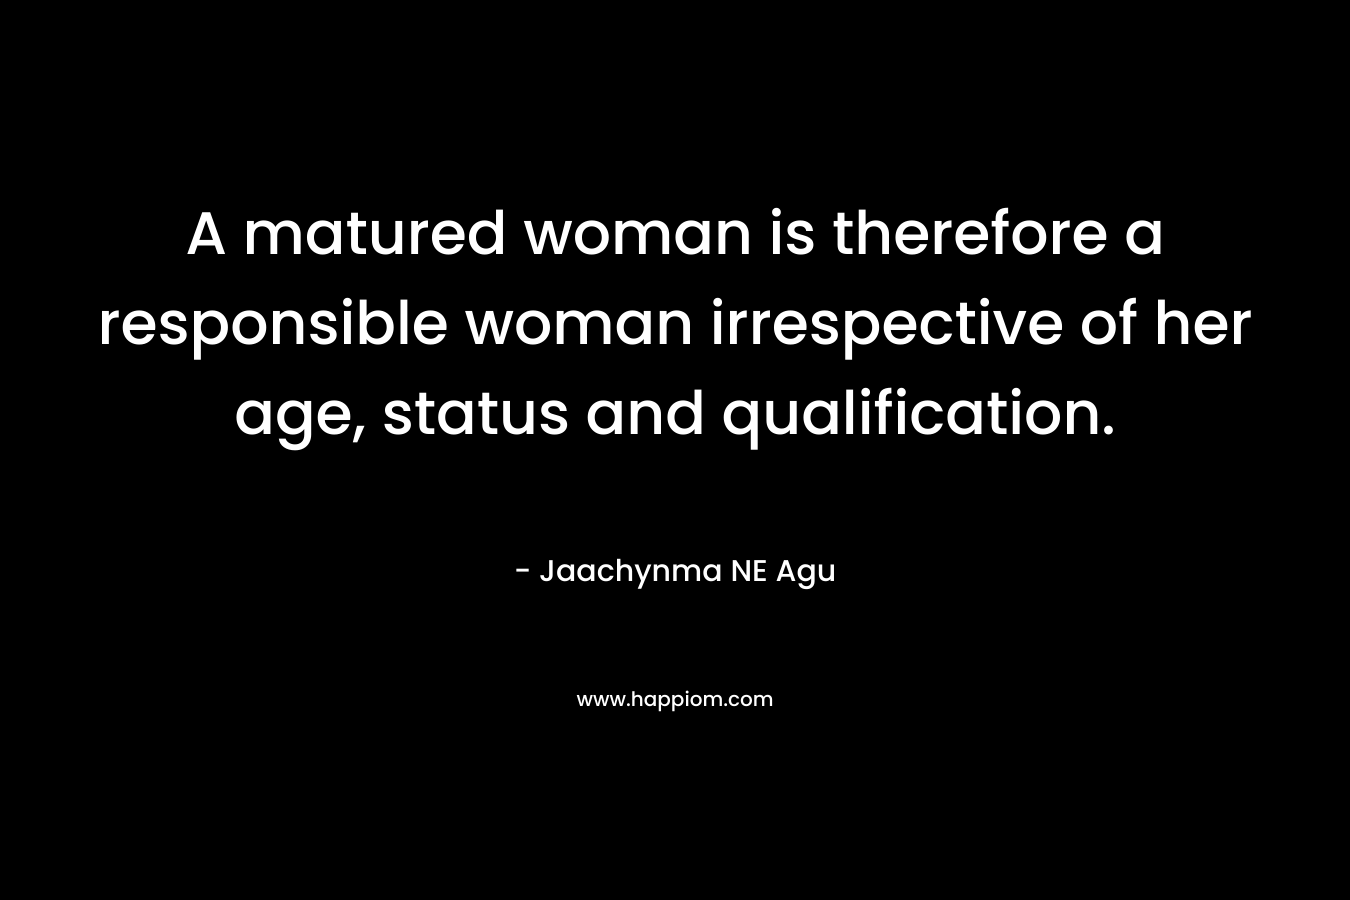 A matured woman is therefore a responsible woman irrespective of her age, status and qualification.